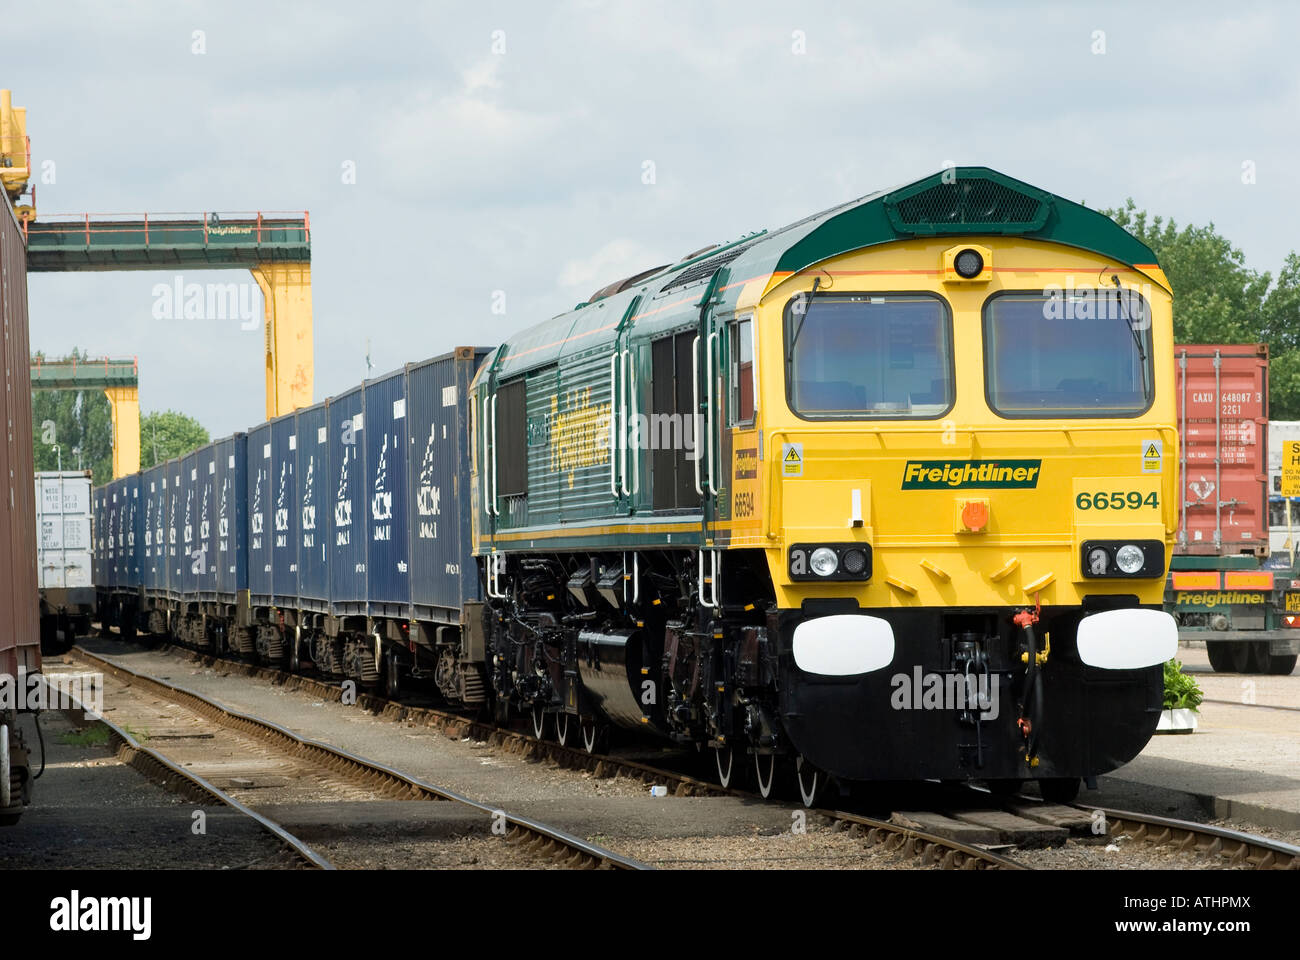 freightliner class 66 locomotive hauling containers at the southampton rail freight terminal Stock Photo